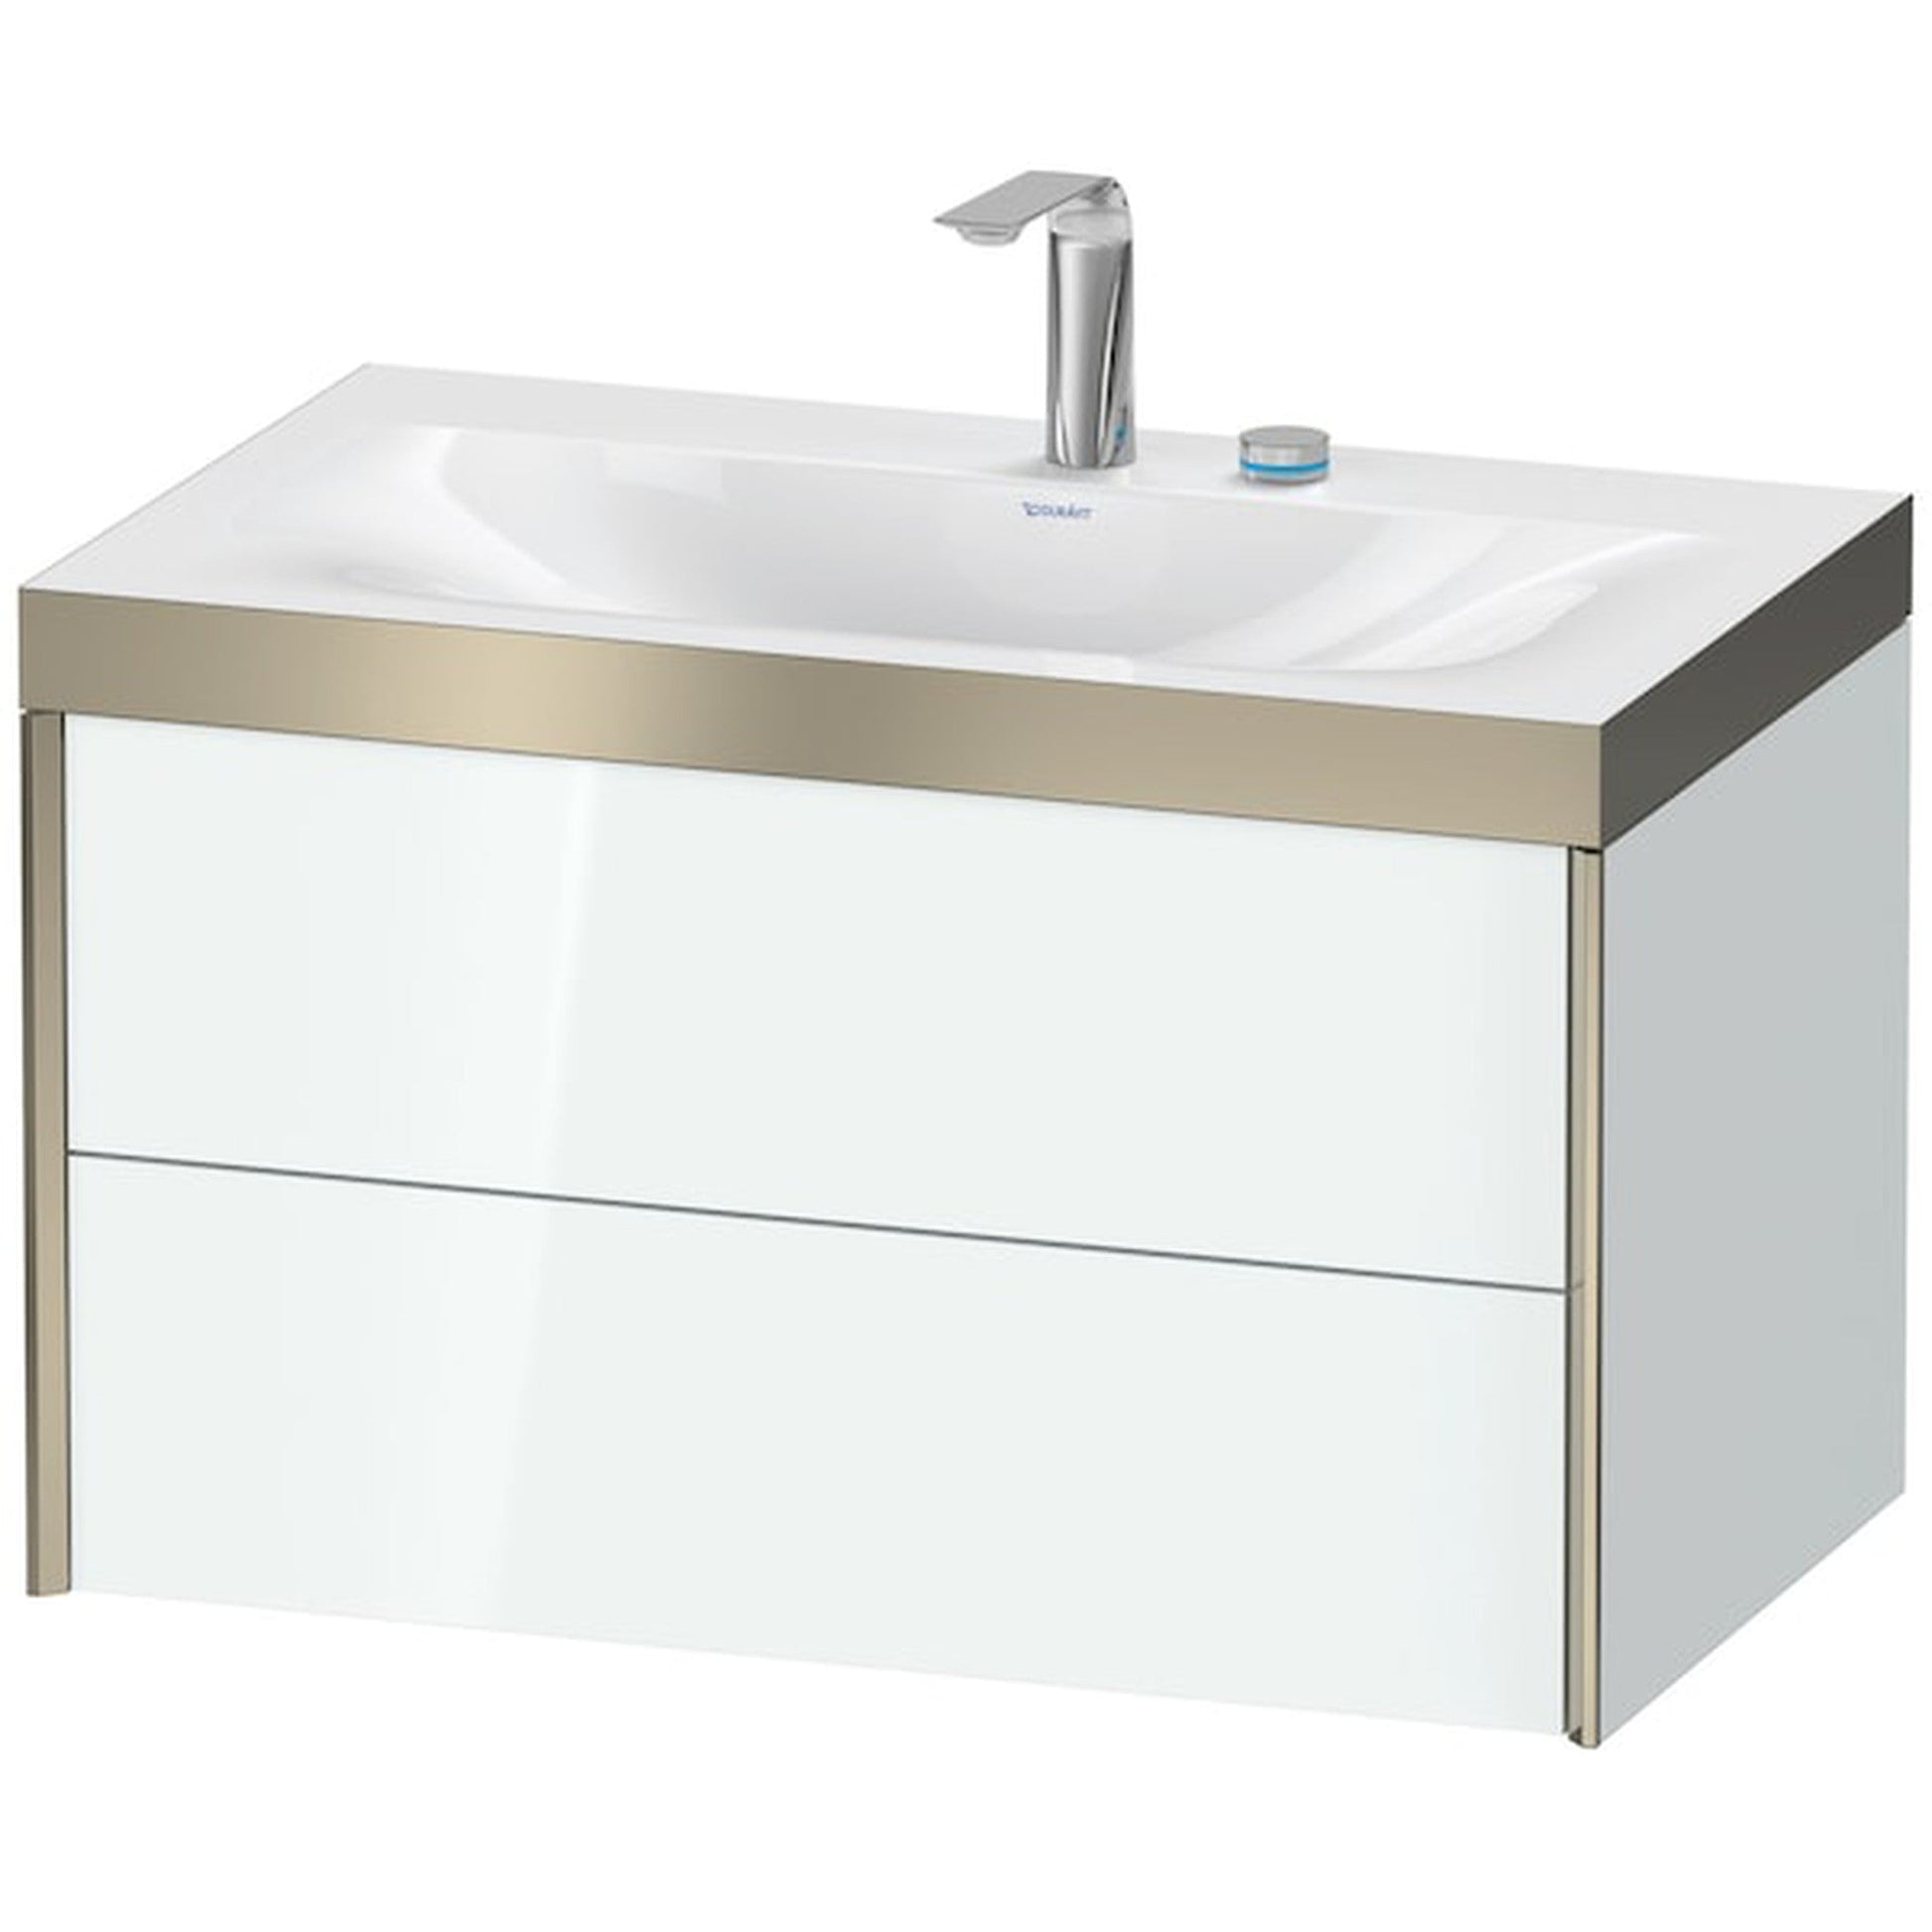 Duravit Xviu 31" x 20" x 19" Two Drawer C-Bonded Wall-Mount Vanity Kit With Two Tap Holes, White (XV4615EB185P)